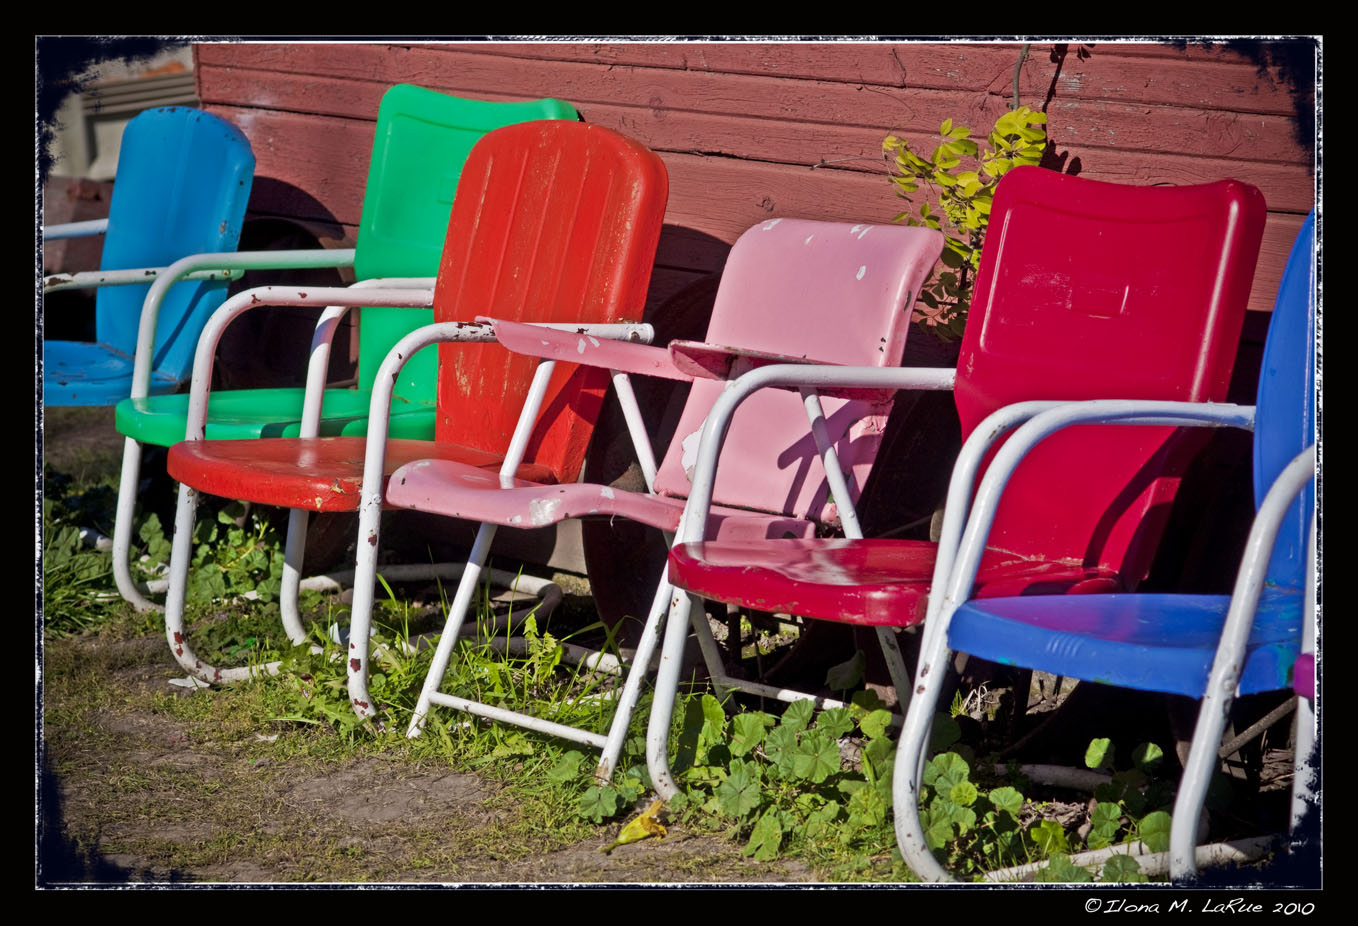 Step Back in Time - Retro Chairs